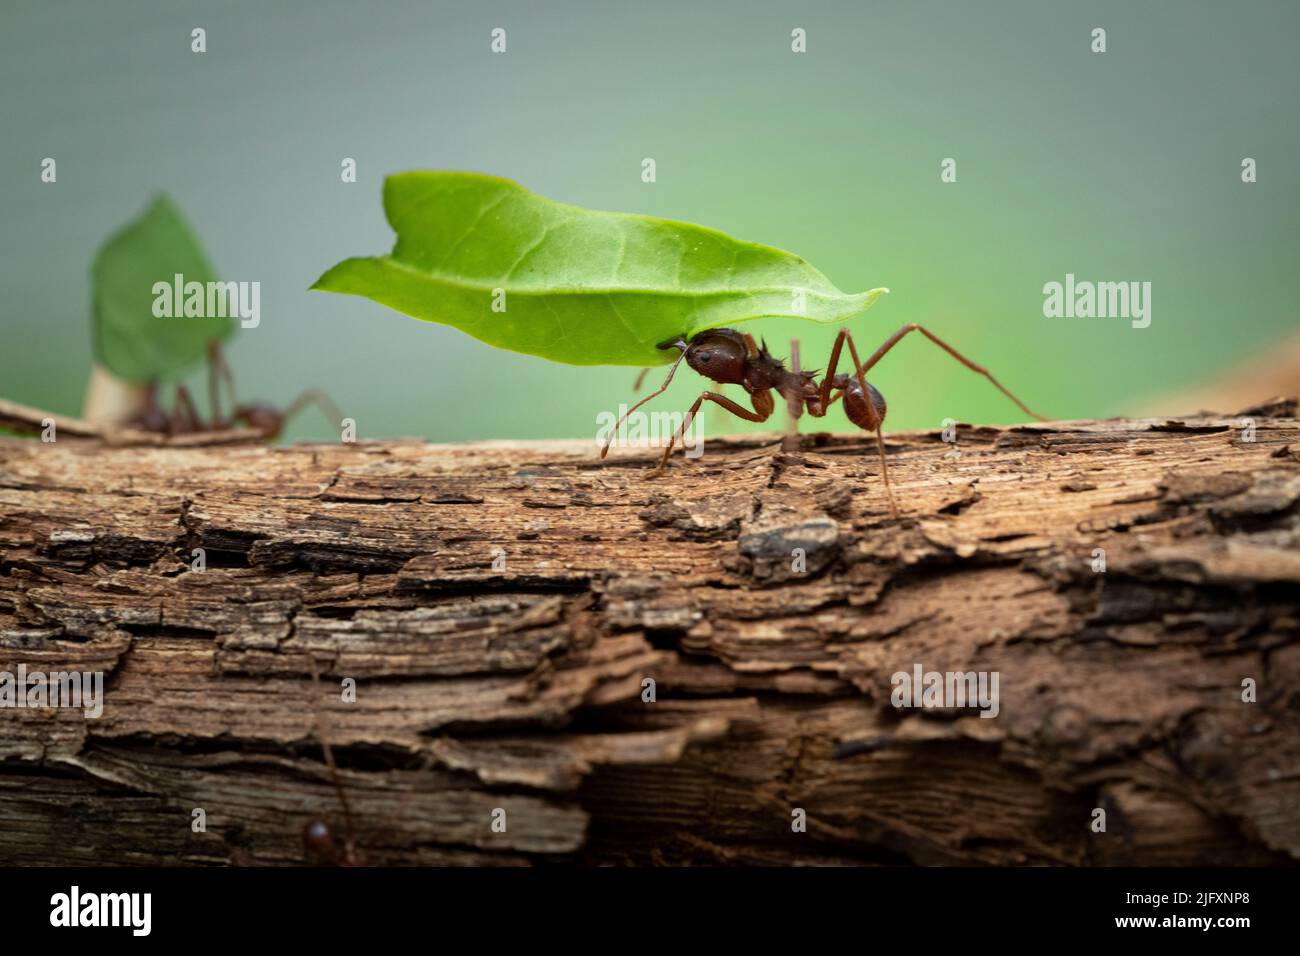 Close-up of a Mexican leaf-cutter ant carrying a leaf back to the nest. Stock Photo